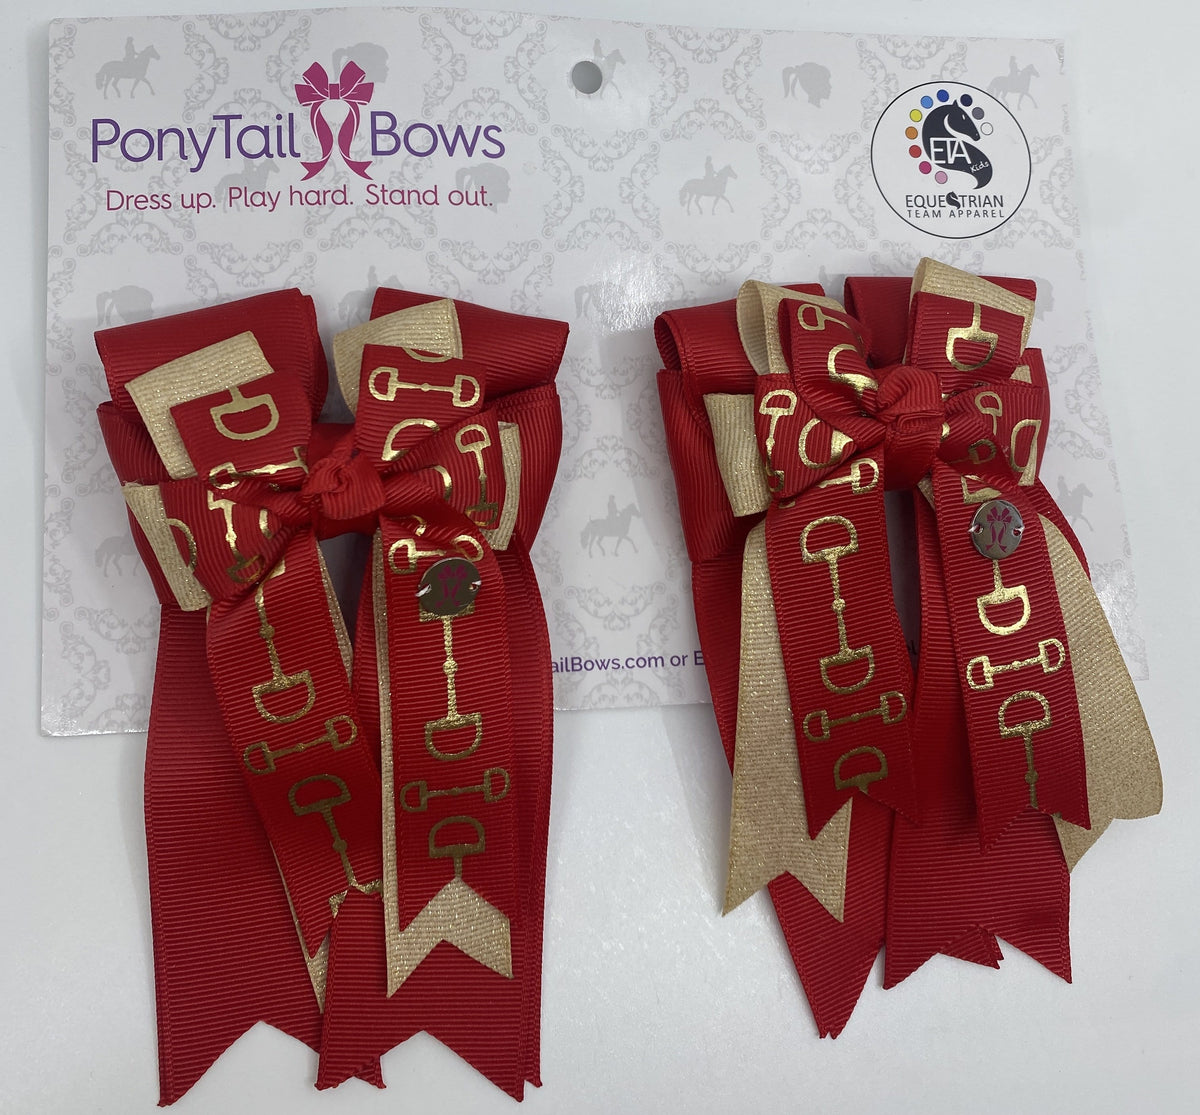 PonyTail Bows 3" Tails Red Gold Bits PonyTail Bows equestrian team apparel online tack store mobile tack store custom farm apparel custom show stable clothing equestrian lifestyle horse show clothing riding clothes PonyTail Bows | Equestrian Hair Accessories horses equestrian tack store